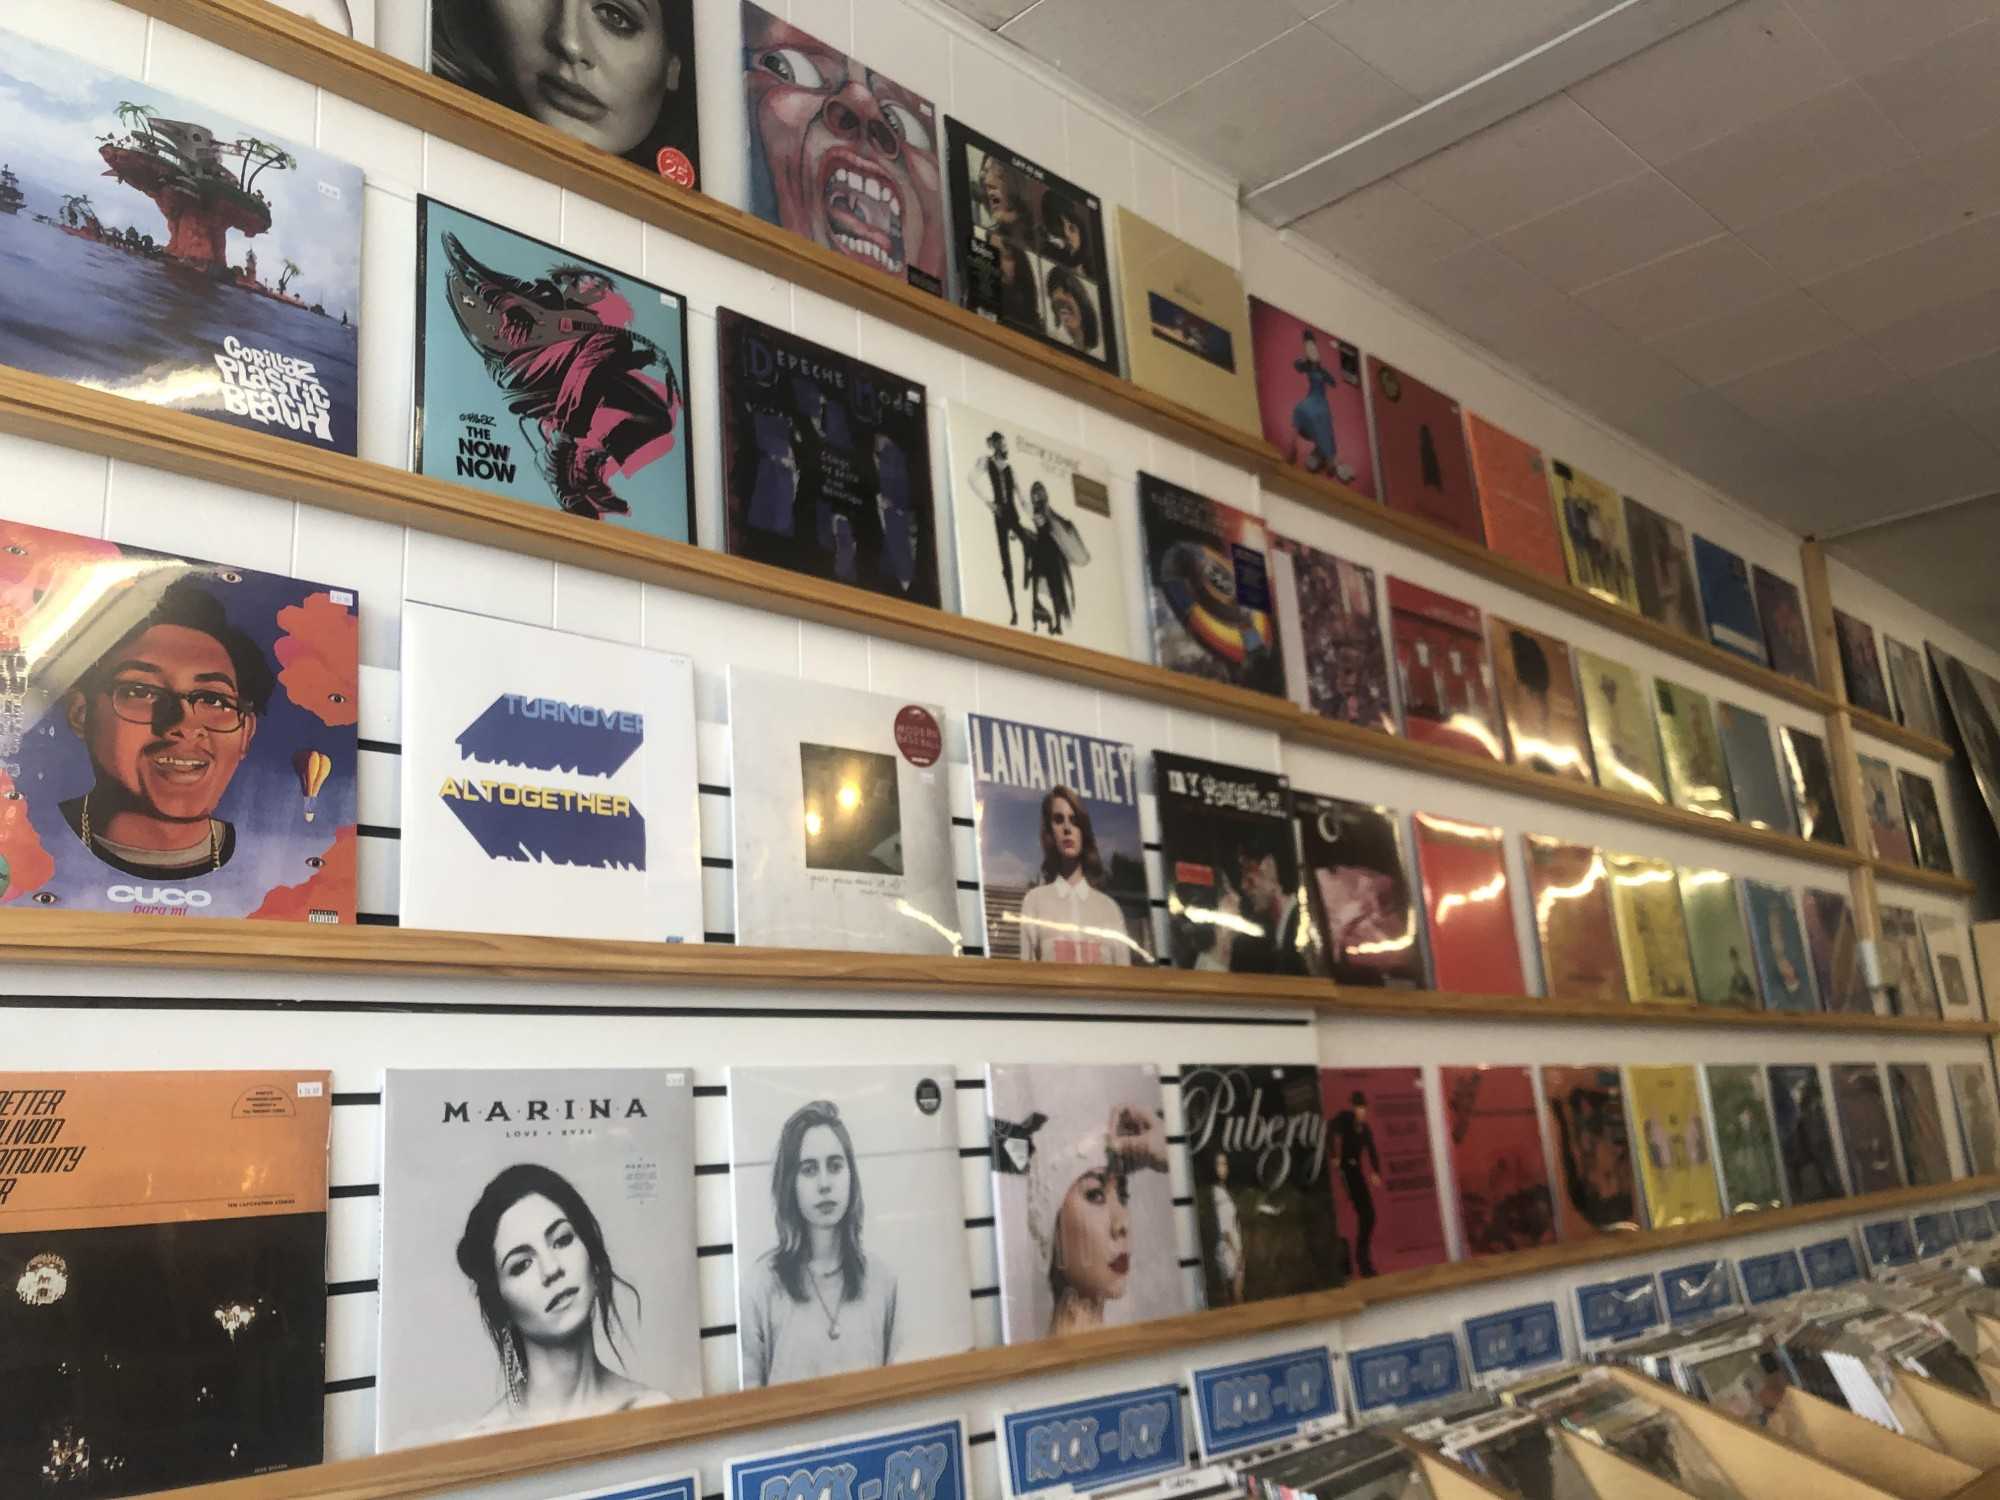 "The Rainbow Wall" at Heroes & Villians displays the latest/hottest vinyl.